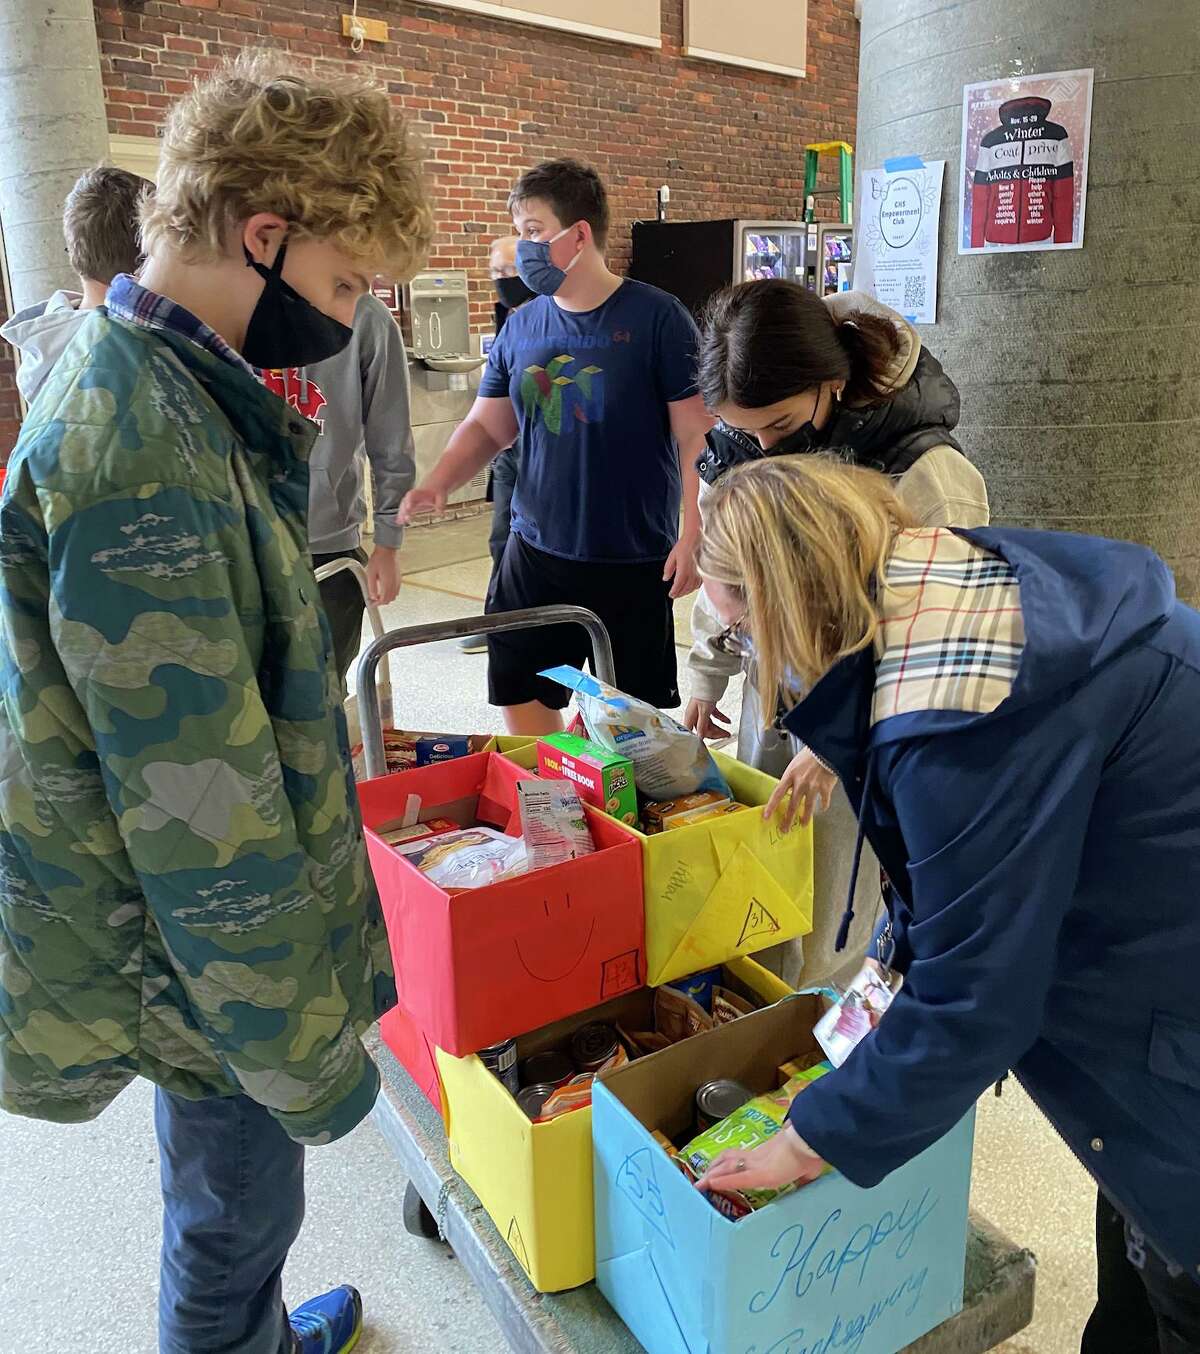 Greenwich High School teacher Kathy Mendez, at right in blue jacket, works with some of her ninth-grade students to pack boxes of food for delivery to community members in need for Thanksgiving on Nov. 22, 2021.